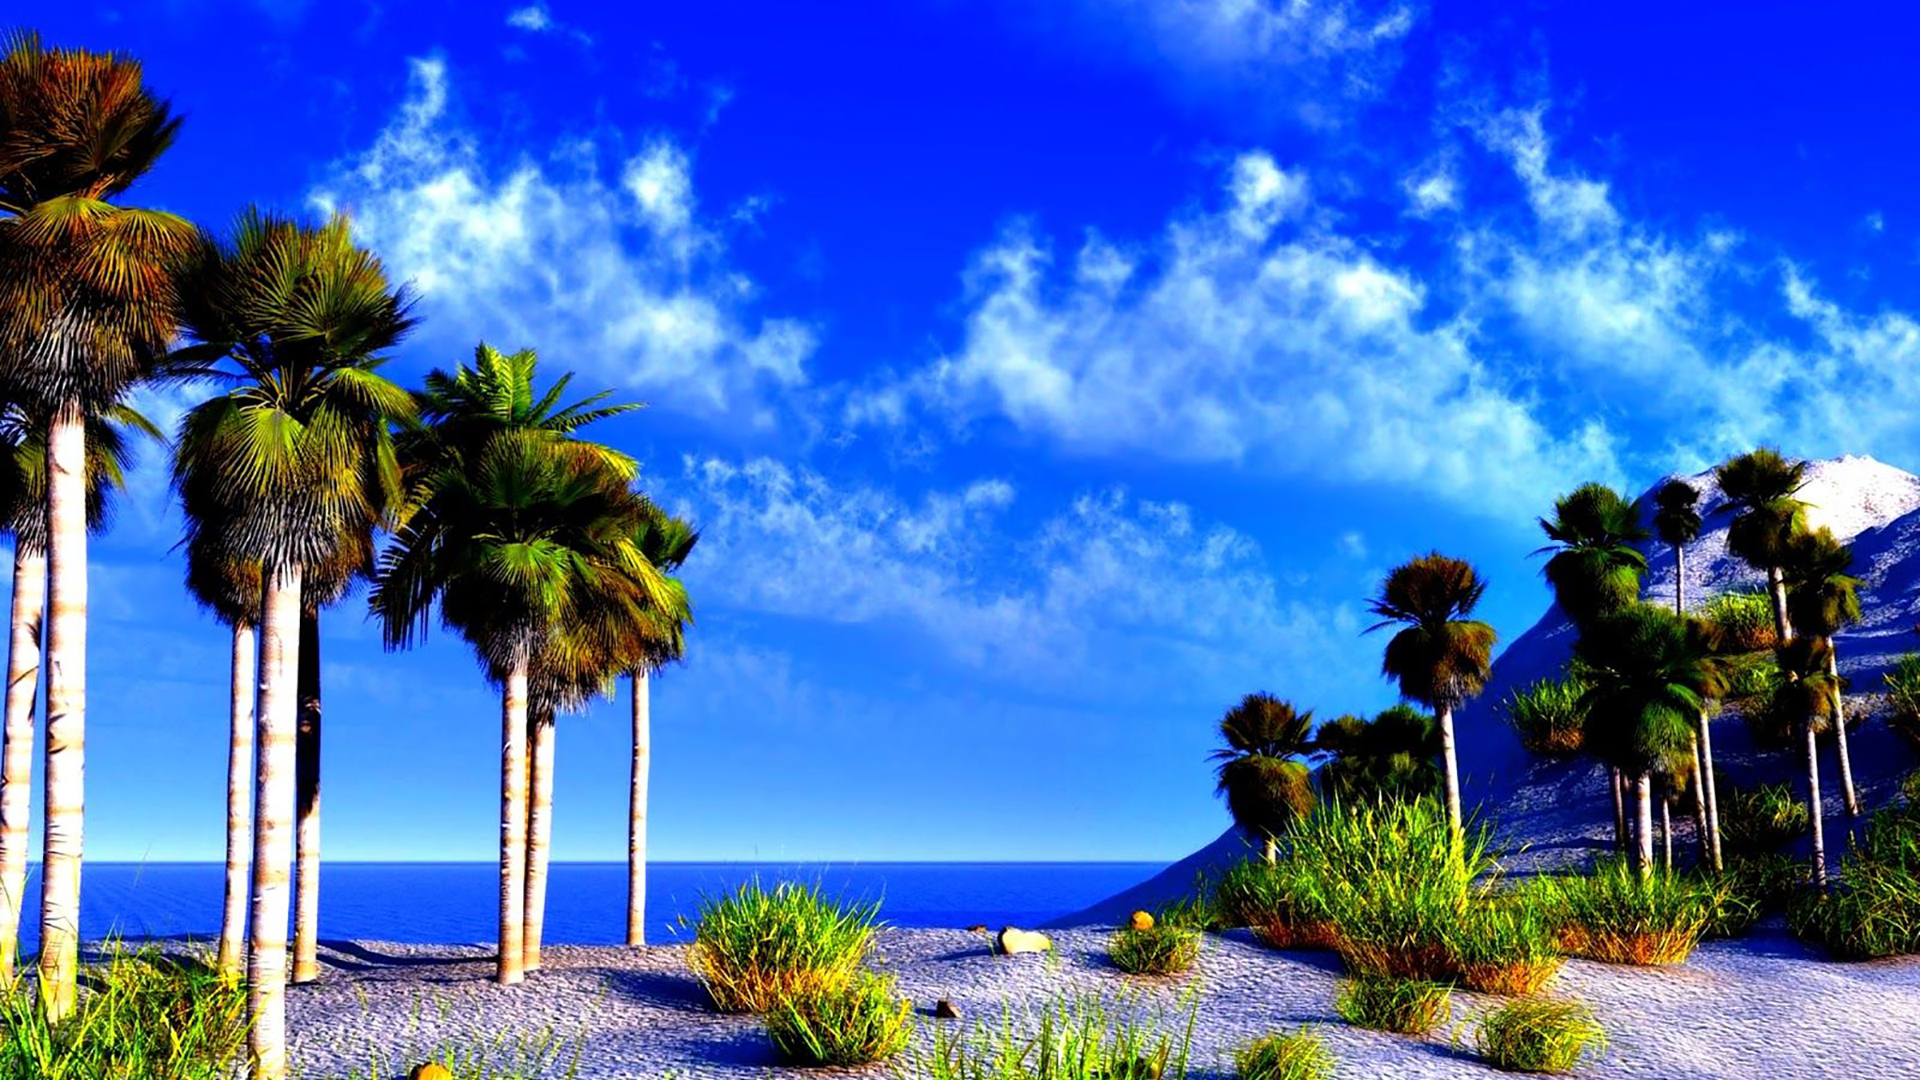 Palm Trees On Beach Sand With Landscape View Of Body Of Water Under Blue White Cloudy Sky 2K Nature